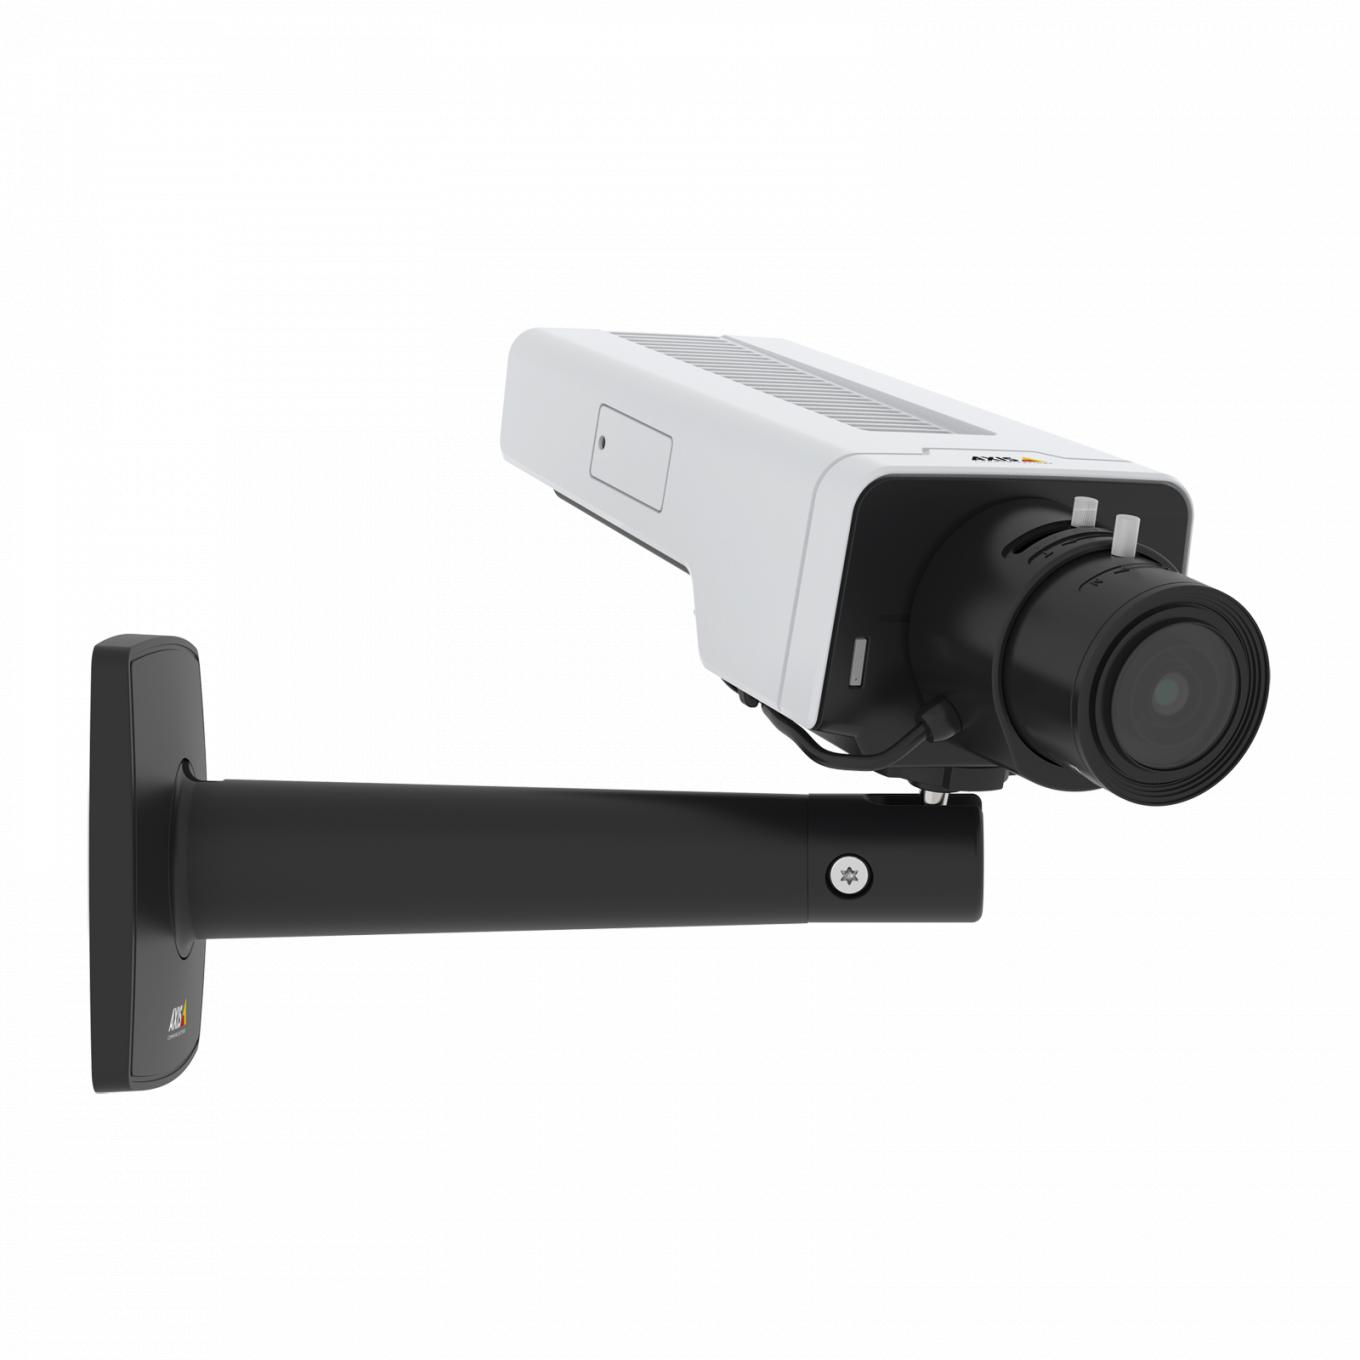 AXIS P1378 IP Camera has Electronic image stabilization. The camera is viewed from its right angle.